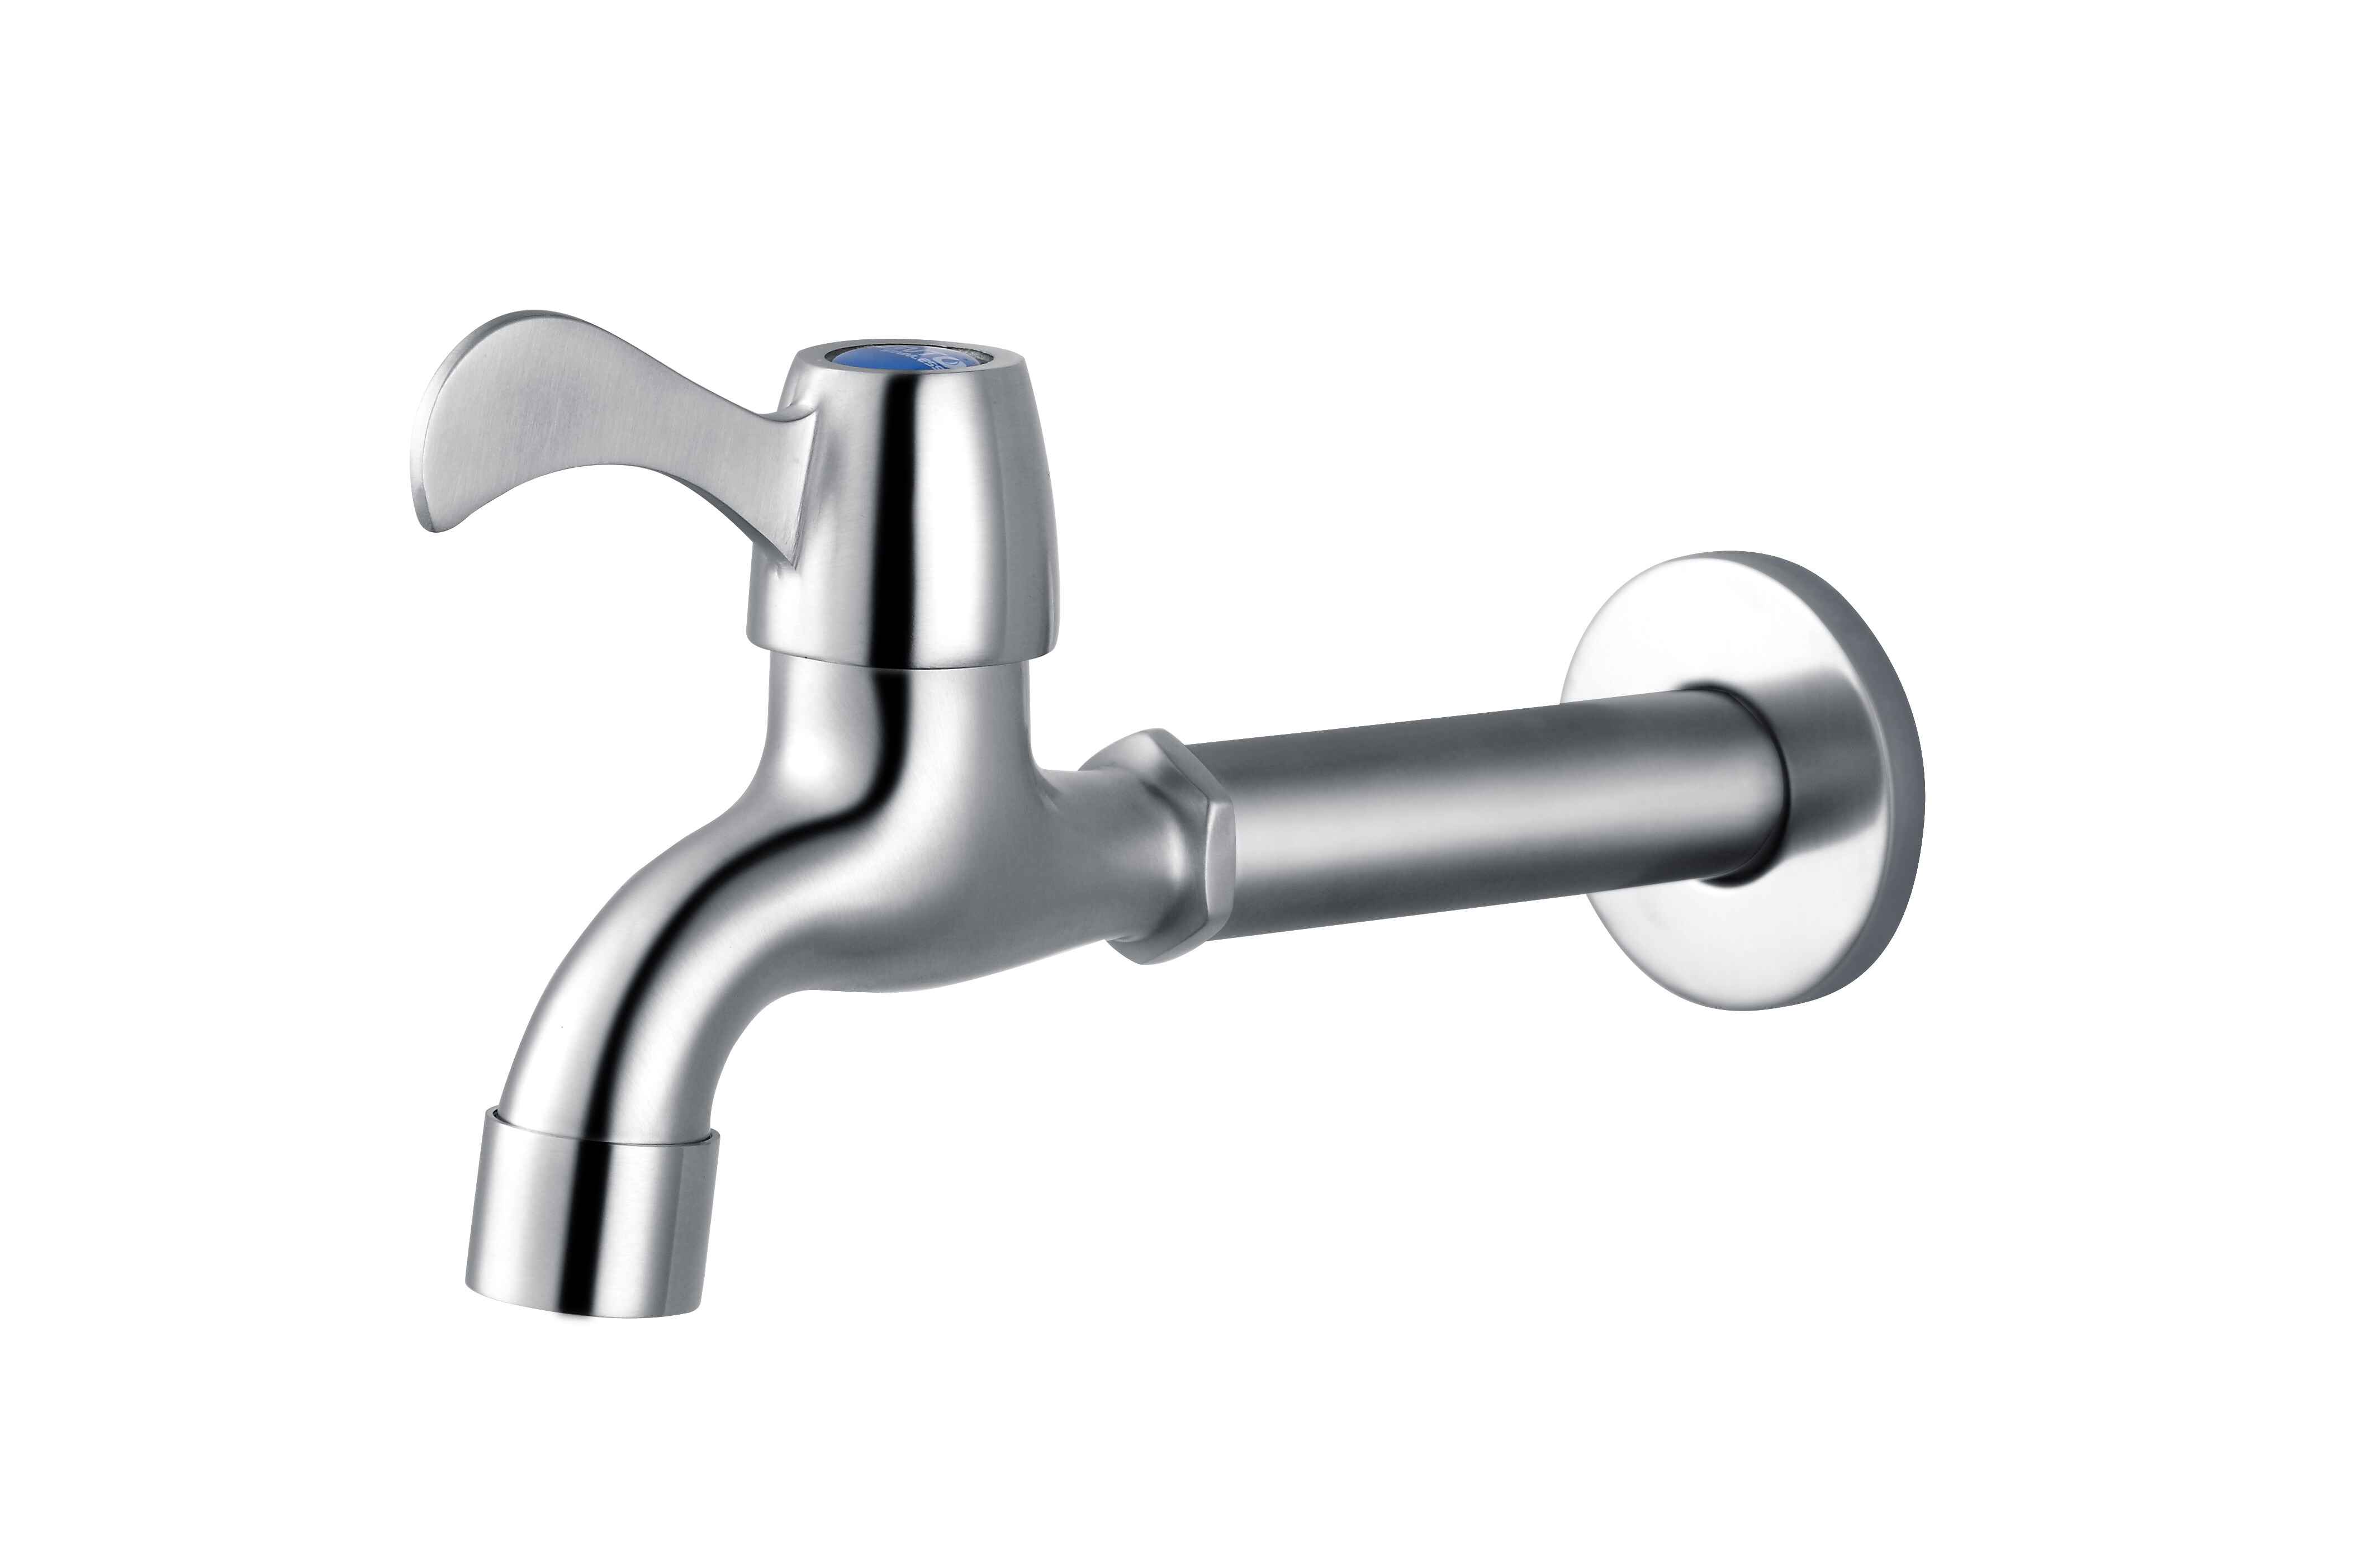 China'S Cheap Price Garden Faucet Sus 304 Wall Tap Brushed Wall Hanging Bathroom Faucet